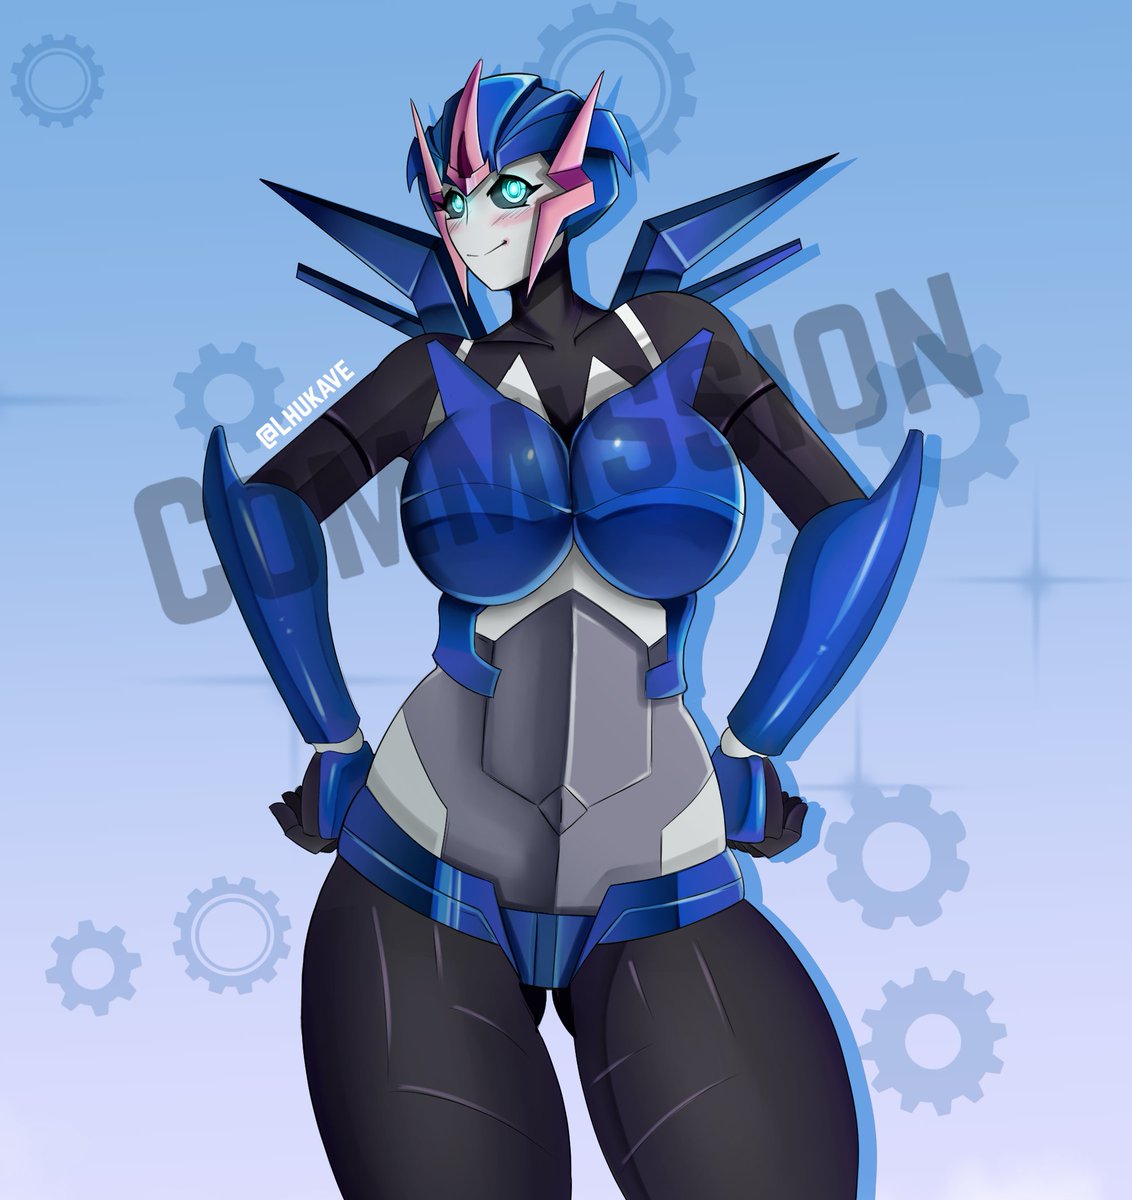 Arcee from Transformers Prime
Commission for anonymous client, thank you very much ^^
.
#Transformers  #transformersprime #Arcee